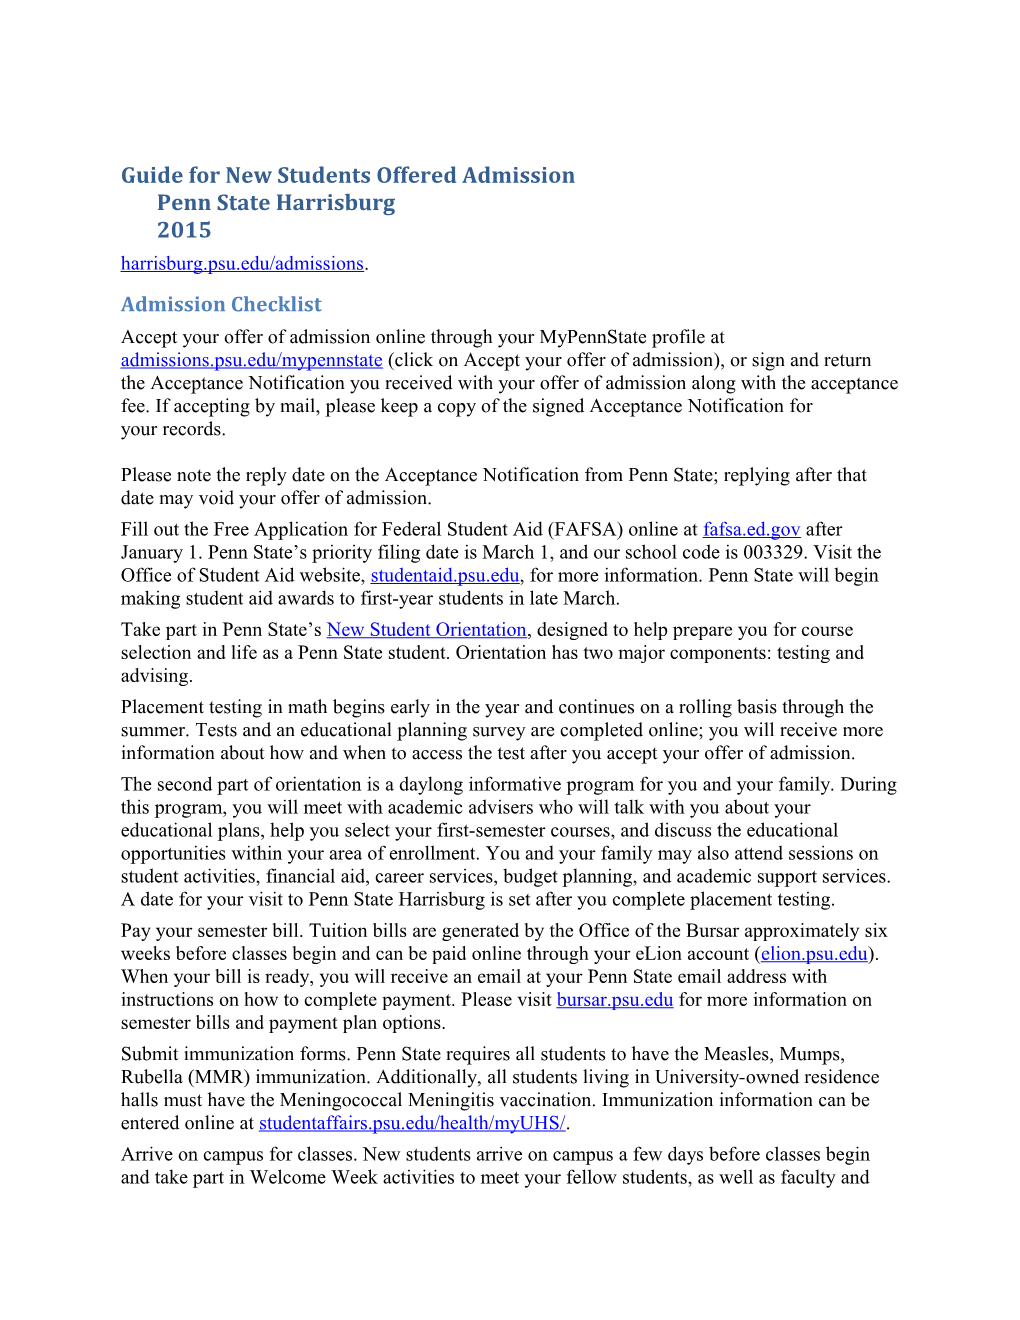 Guide for New Students Offered Admissionpenn State Harrisburg2015